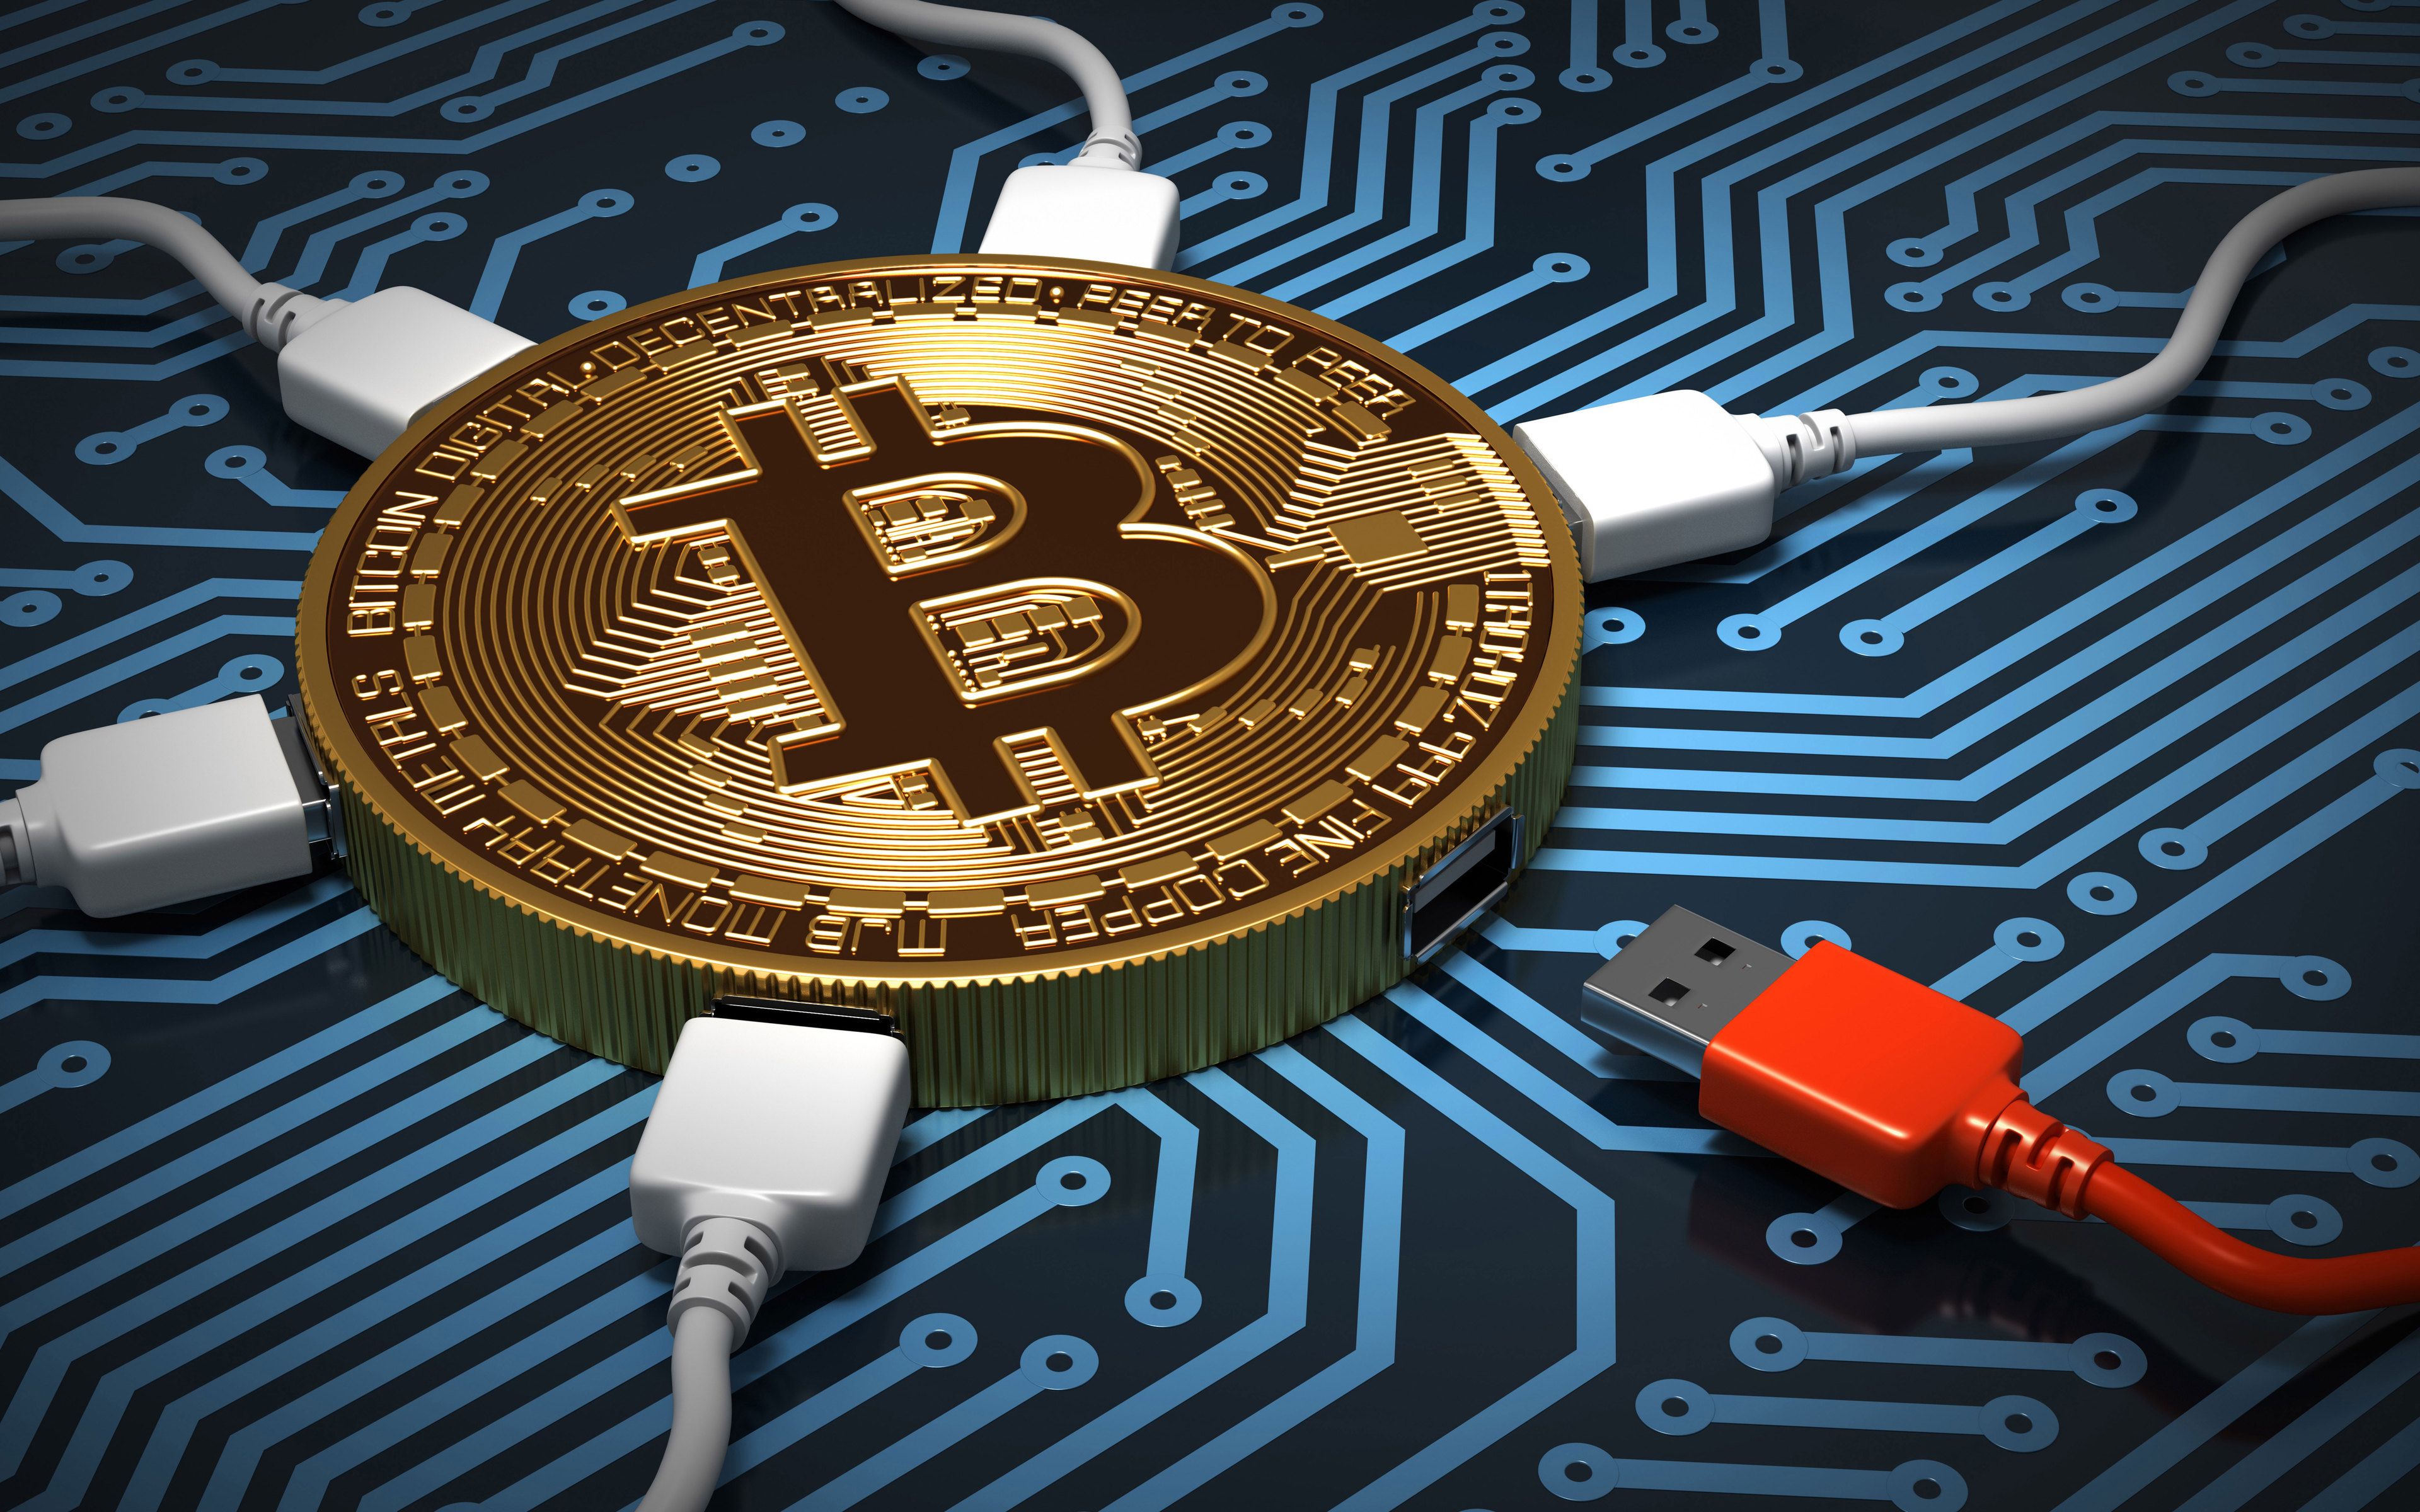 Download wallpaper bitcoin, Concepts, payment network, online